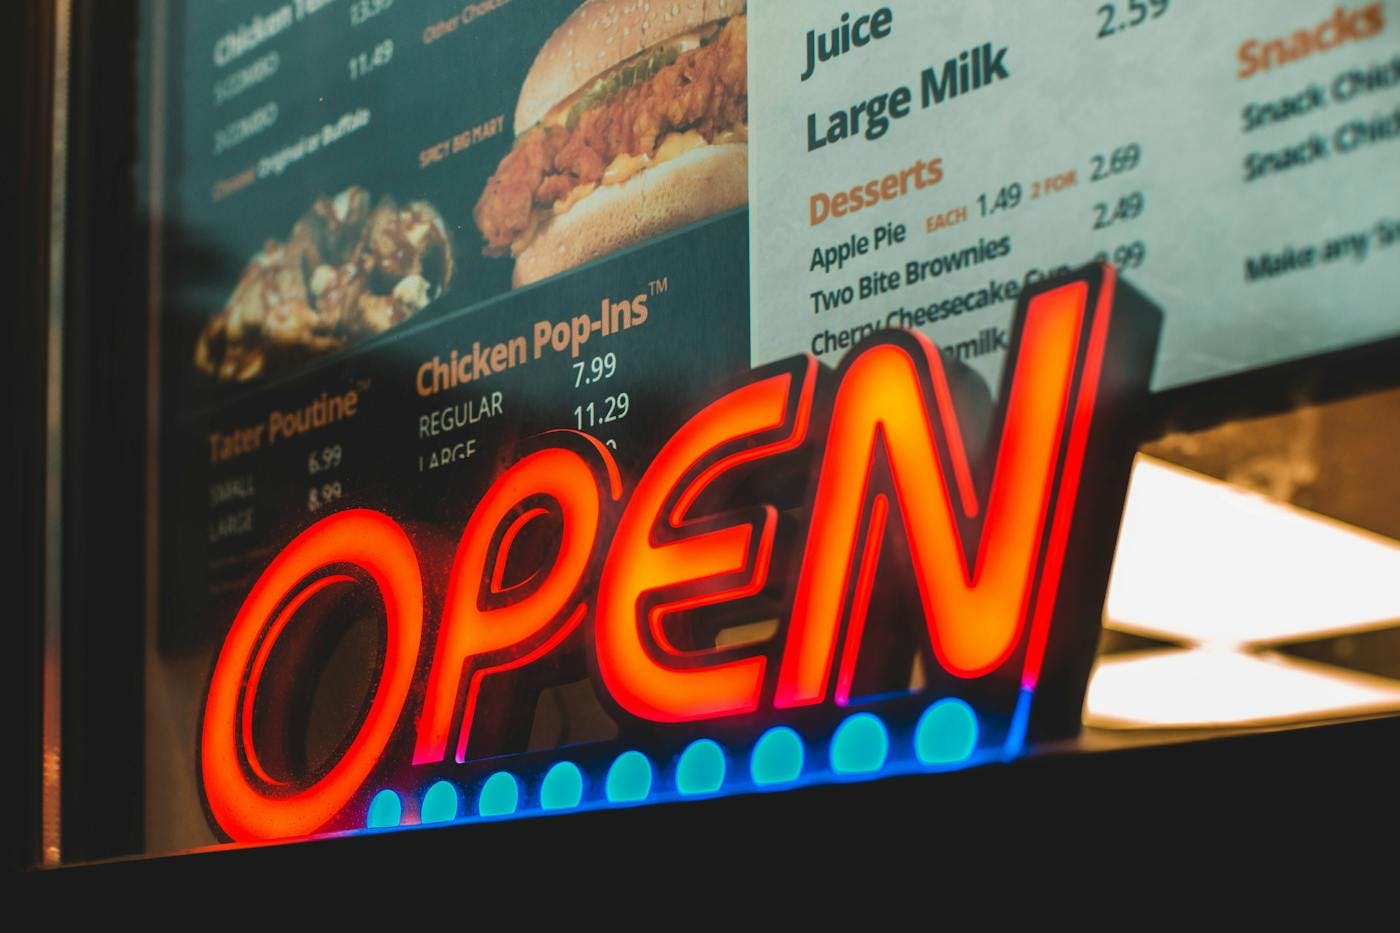 ScreenCloud Article - How Food Menu Media Help QSRs Offer Elevated Digital Dining Experiences